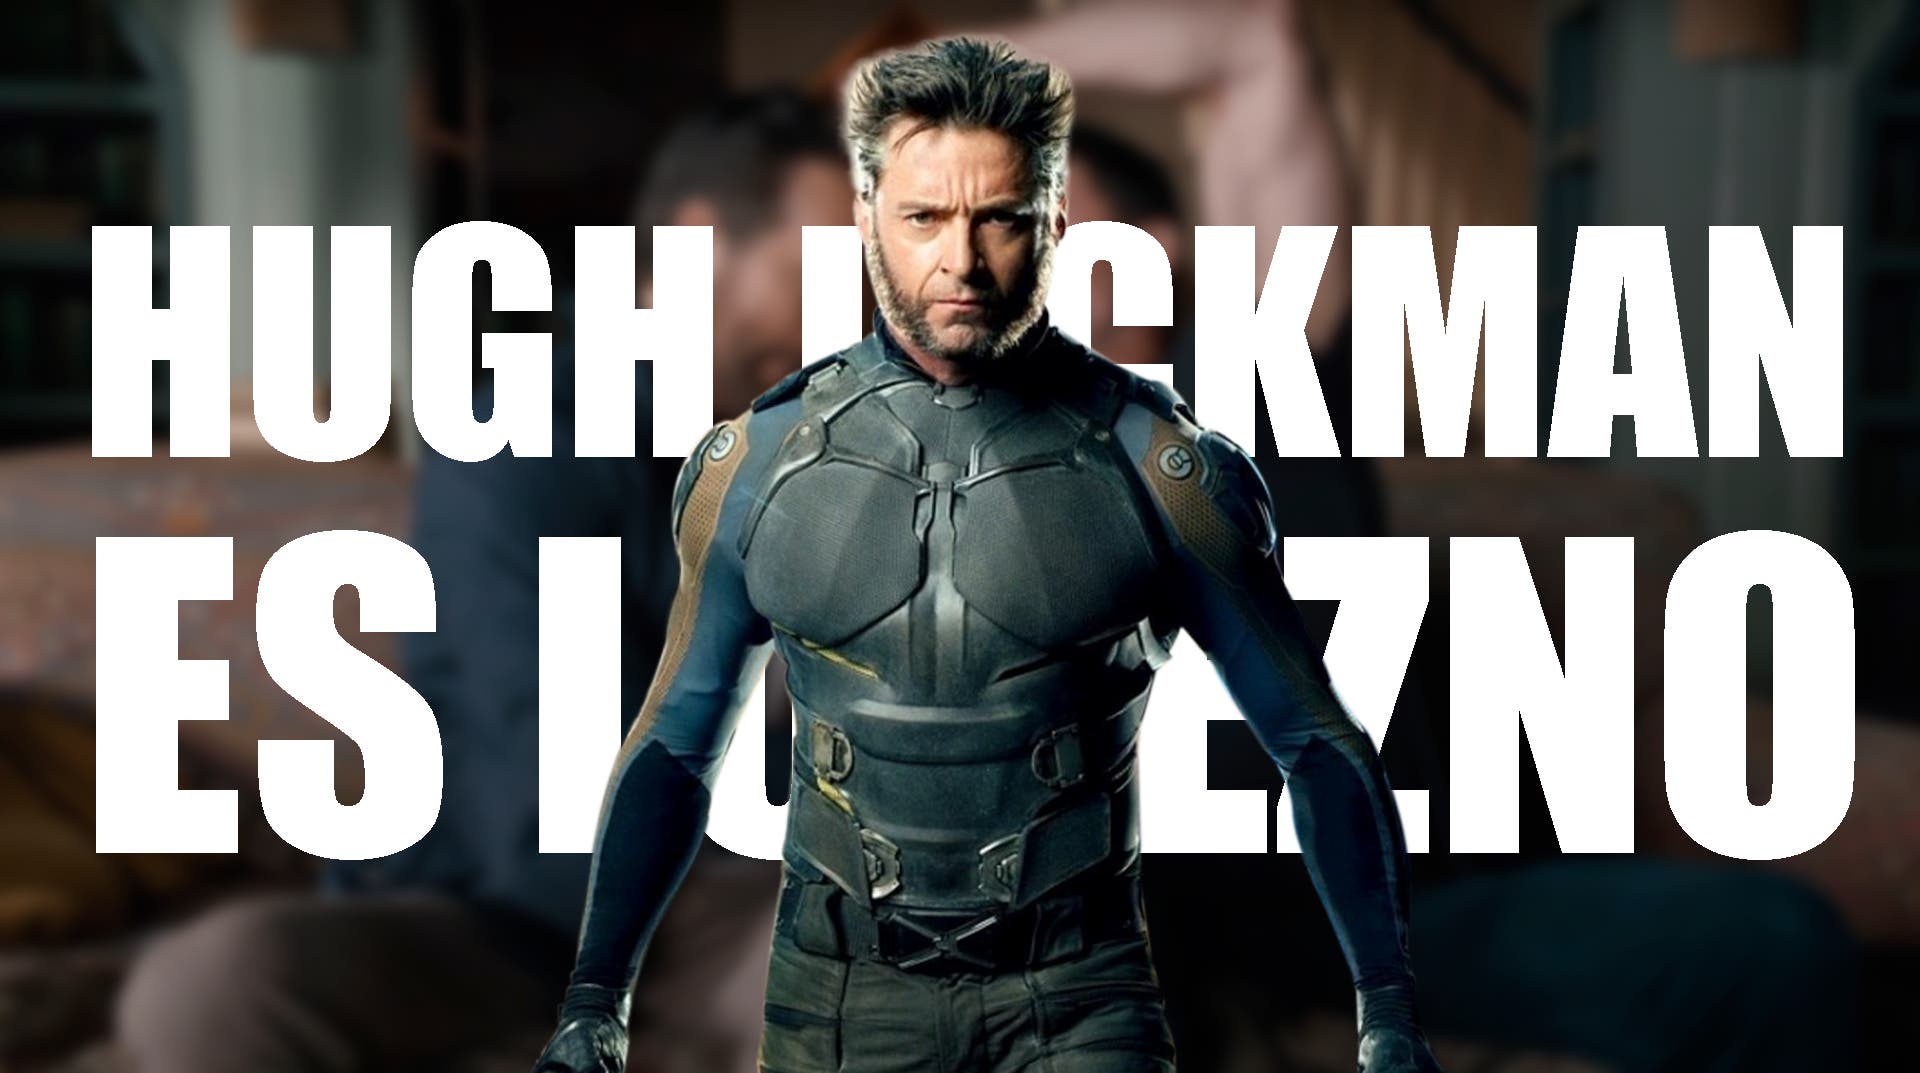 Hugh Jackman’s Physical Change To Become Wolverine At 54: Here’s How He’s Preparing For Deadpool 3